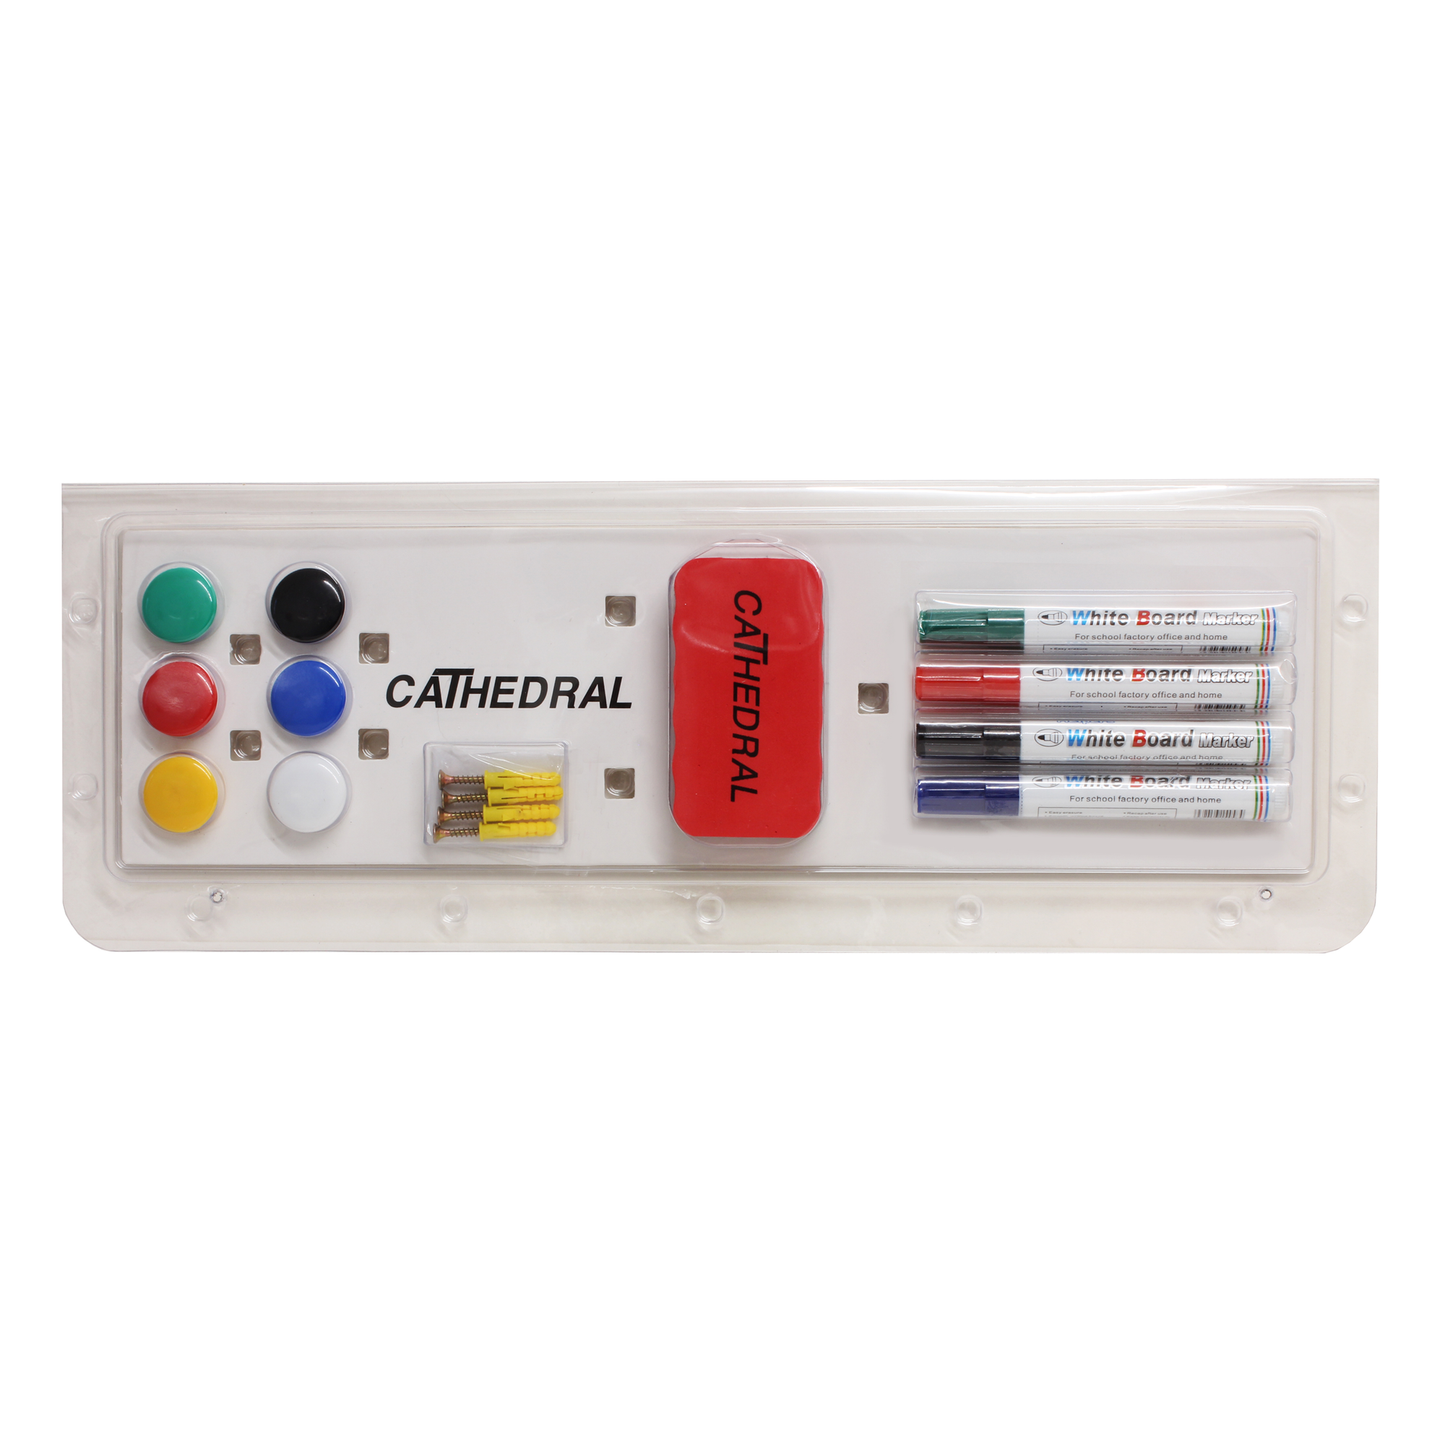 Pack of included whiteboard accessories, comprising of 6 multicoloured round magnets, dry erase markers in green, red, blue and black, as well as a whiteboard eraser, with Cathedral Products branding, and a pack of screws and wall plugs for wall mounting the board. These are displayed in plain transparent packaging.